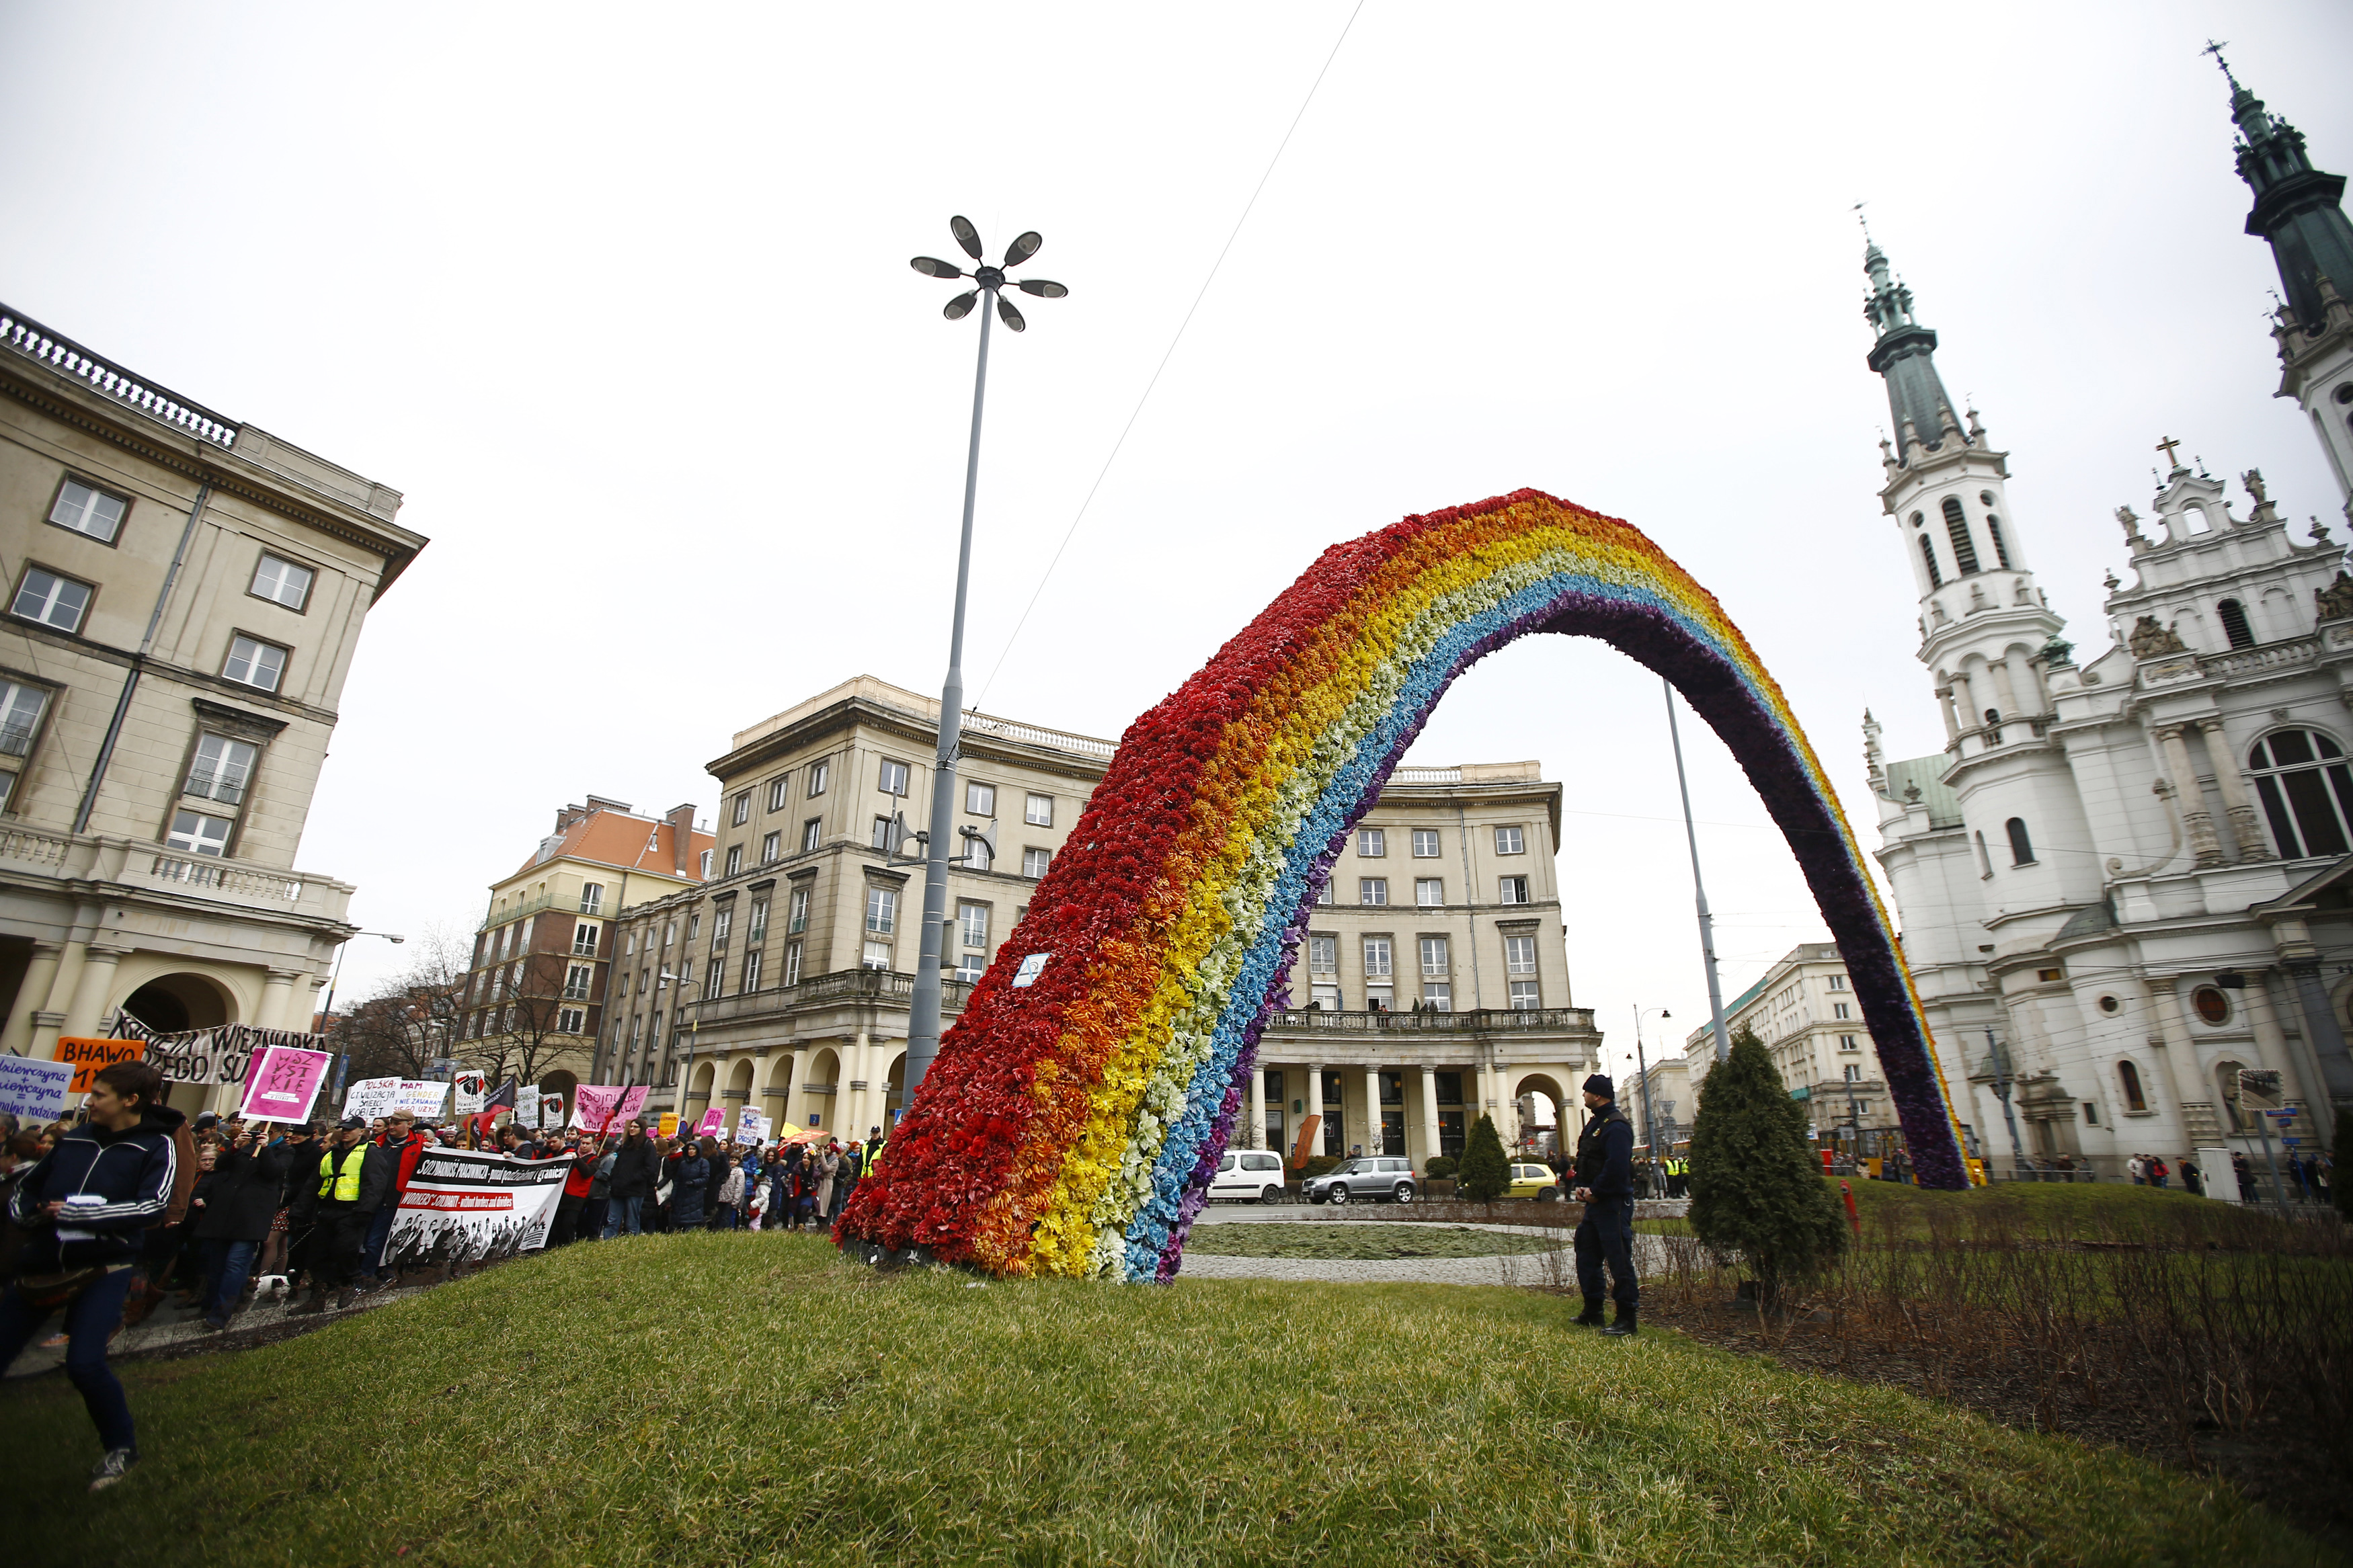 Participants march in front of artistic installation <i>Rainbow</i> during an International Women's Day rally in Warsaw on March 8, 2015 (Kacper Pempel —Reuters)